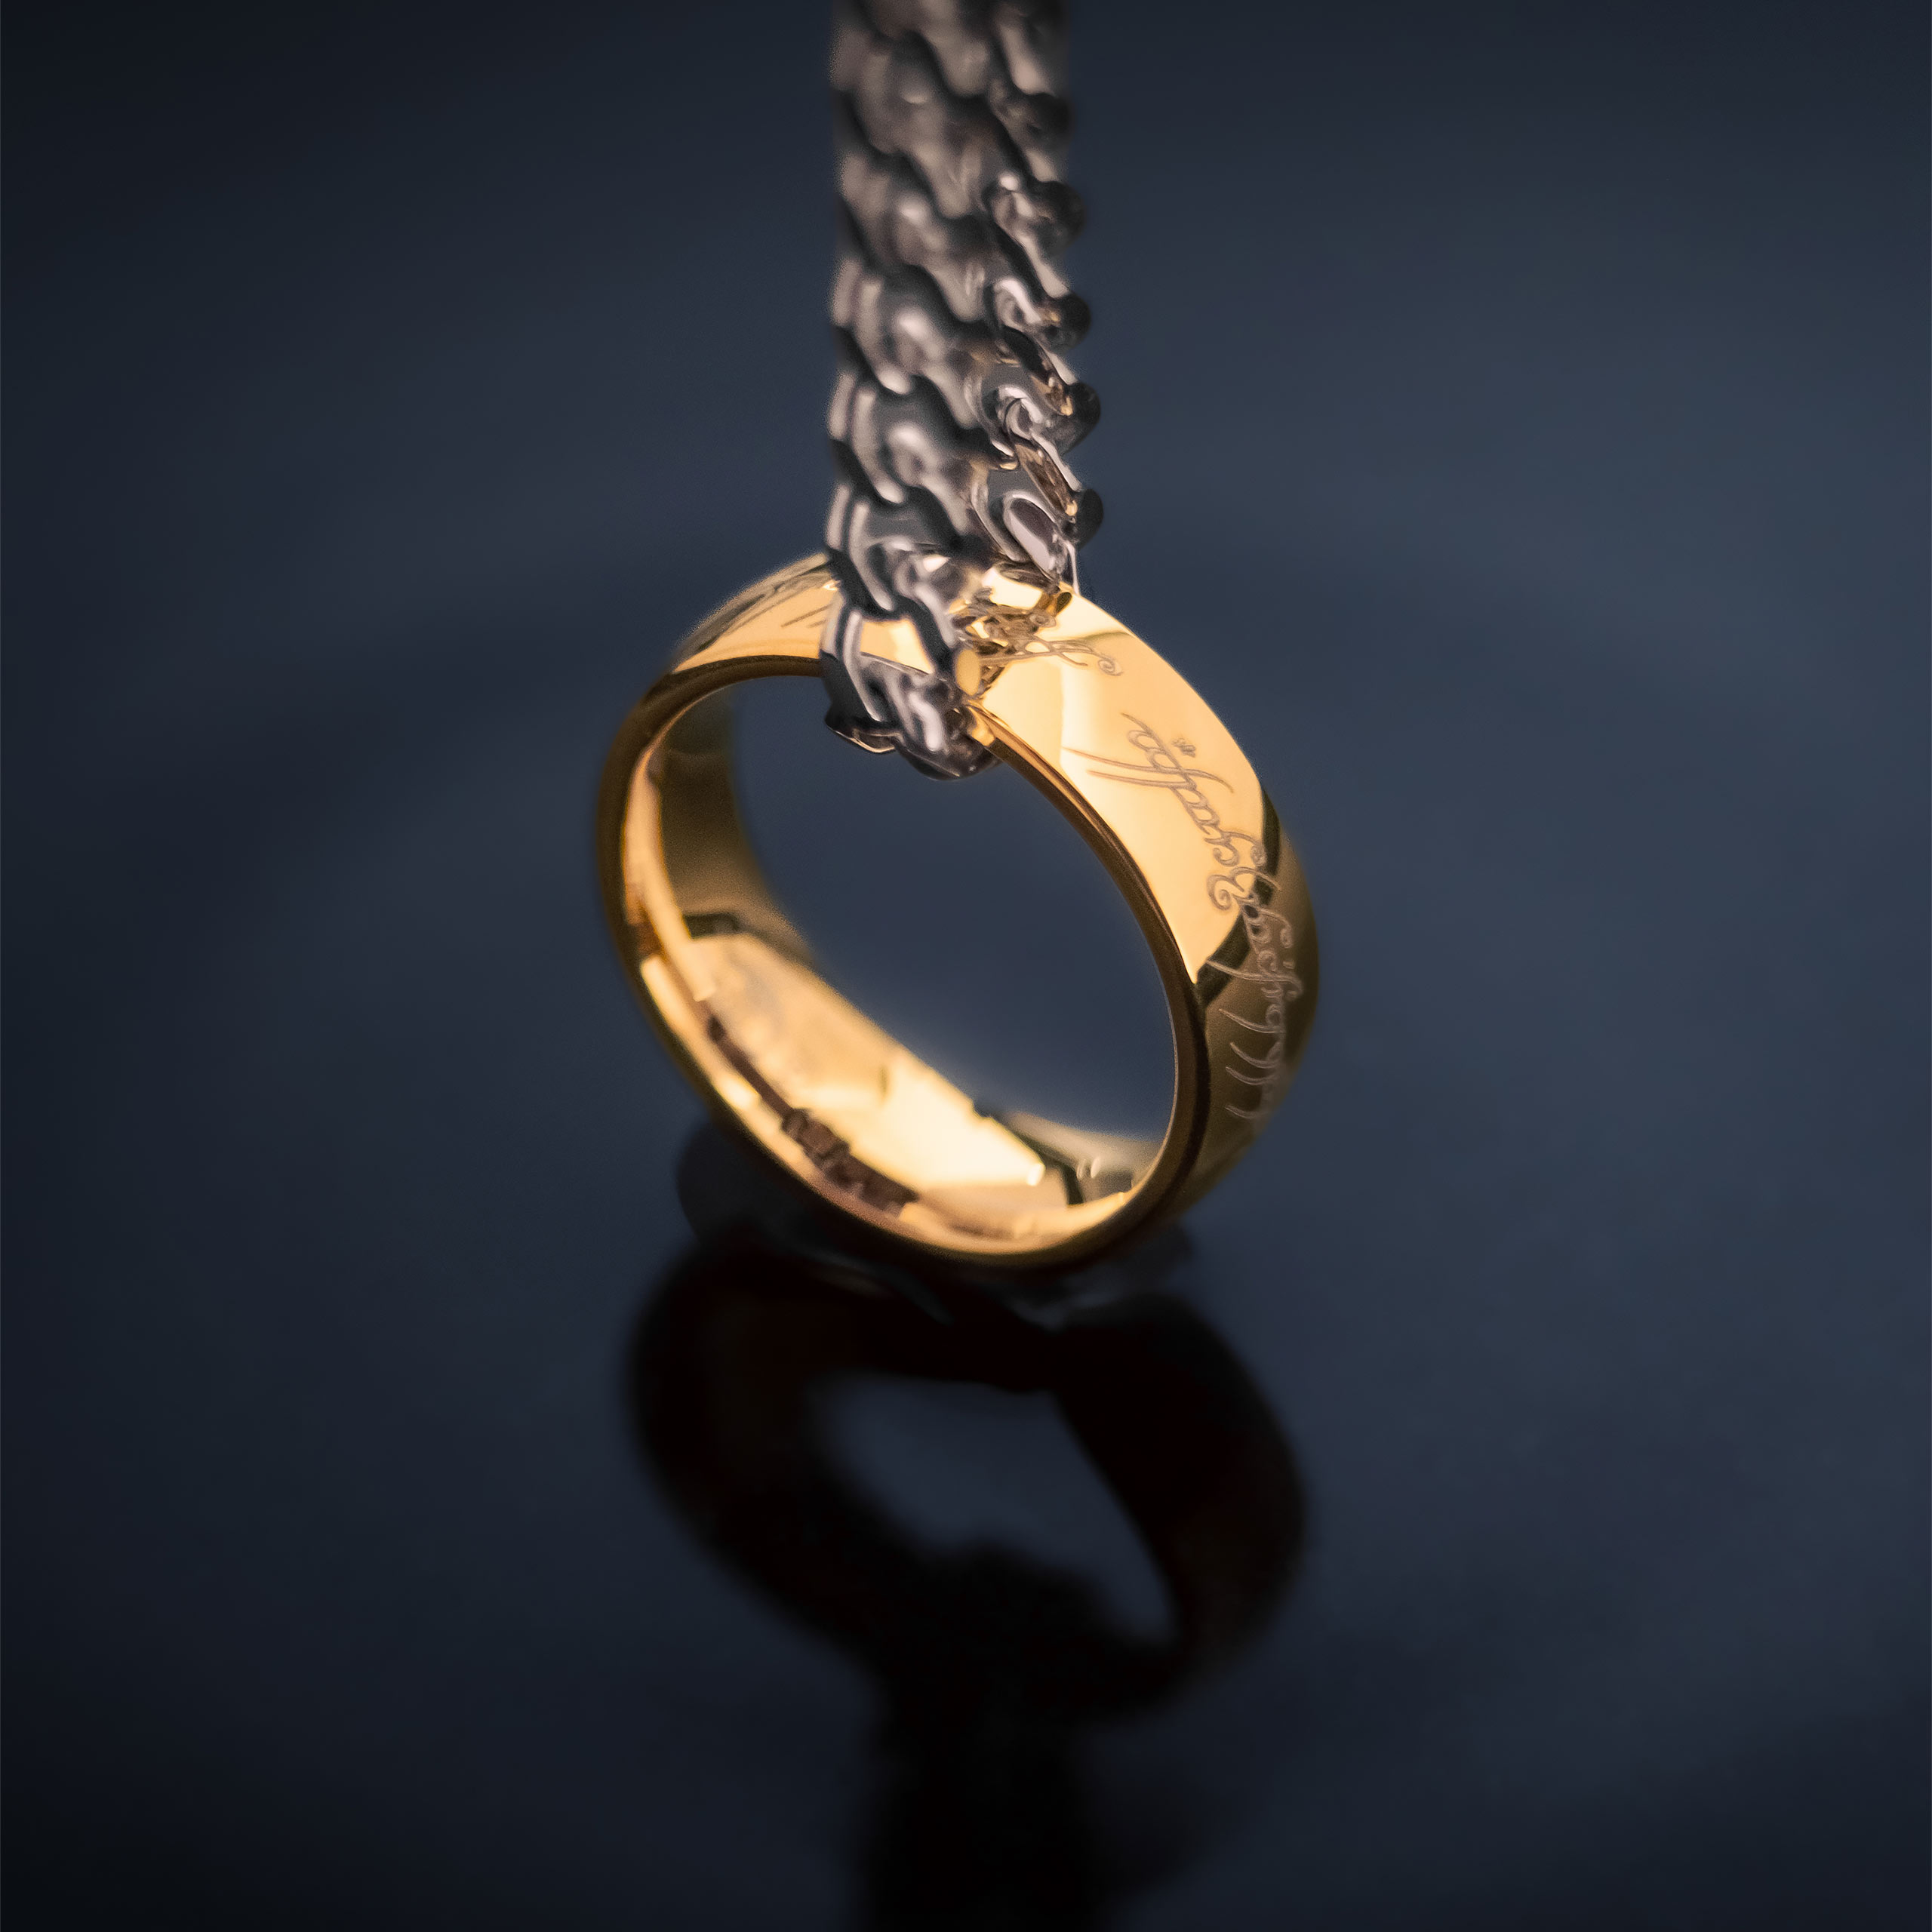 Lord of the Rings - The One Ring on Chain